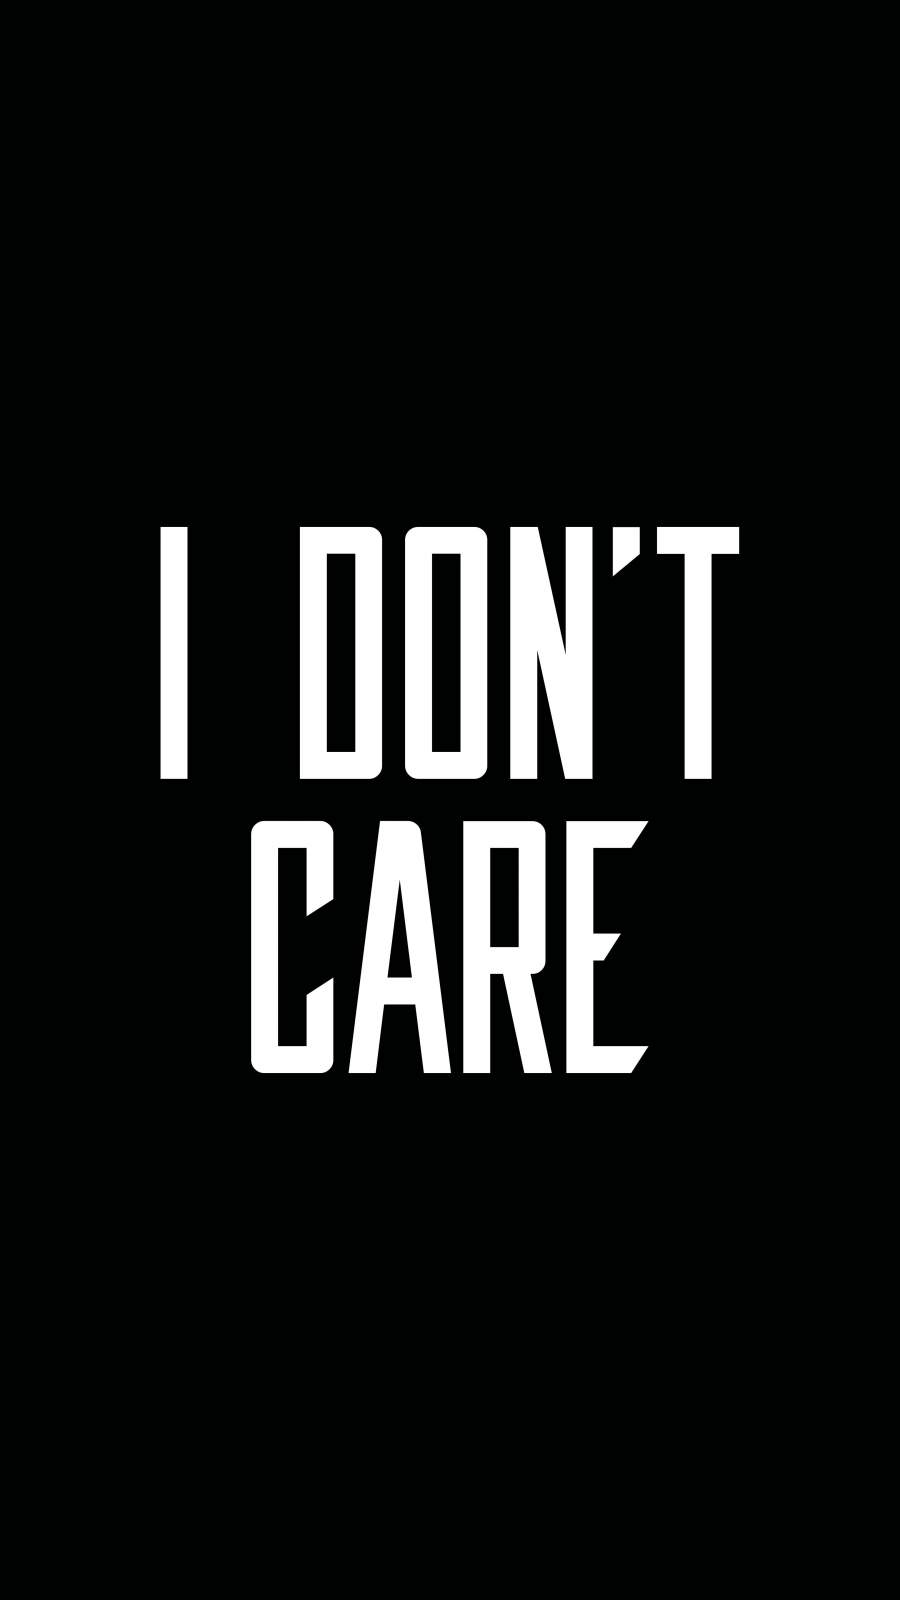 I Dont Care - IPhone Wallpapers : iPhone Wallpapers